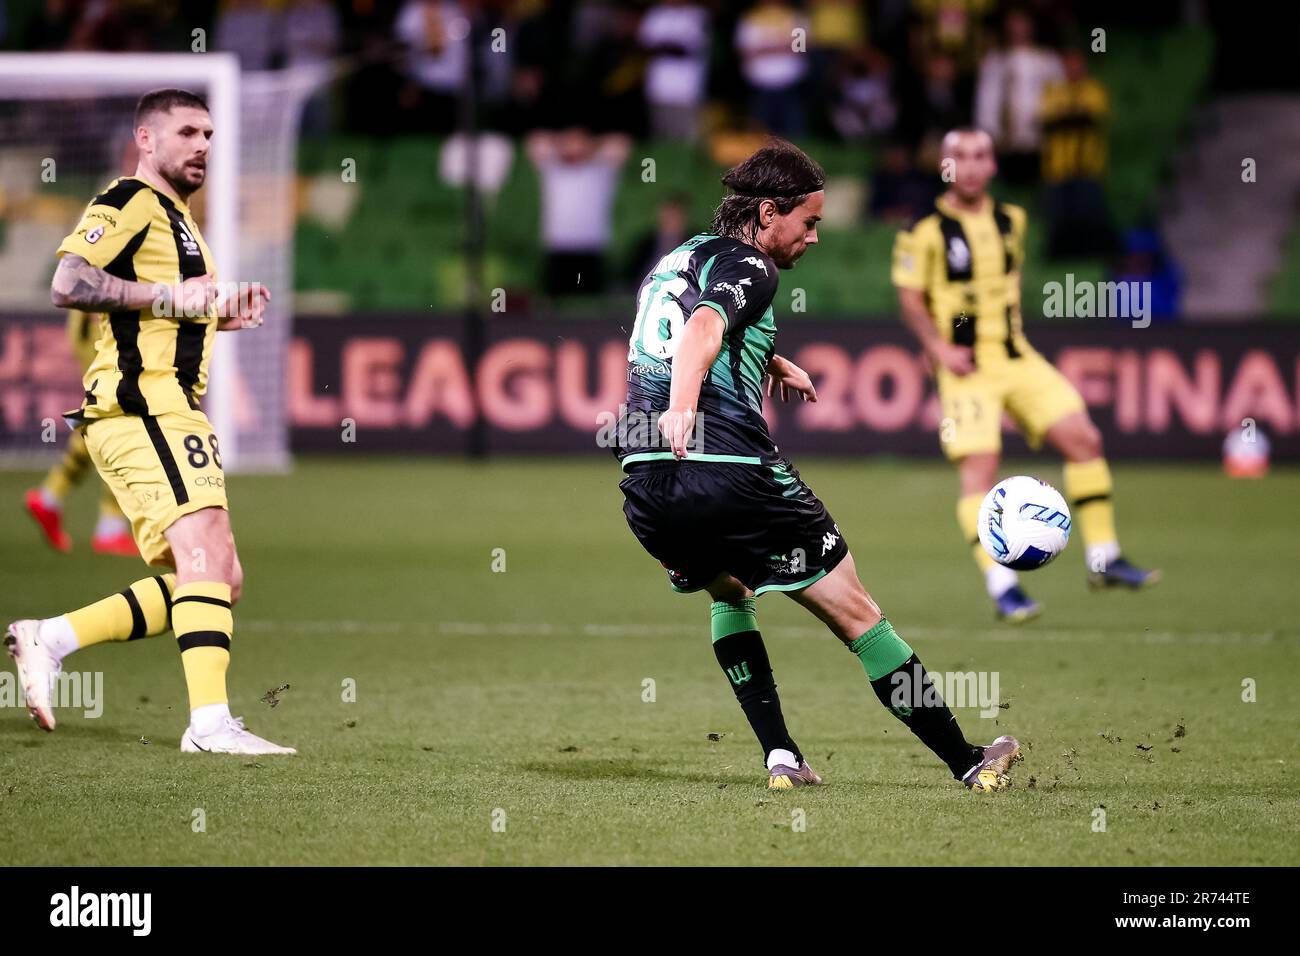 MELBOURNE, AUSTRALIA - MAY 14: Rene Krhin of Western United kicks the ball  during the A-League Elimination Final soccer match between Western United and Wellington Phoenix at AAMI Park on May 14, 2022 in Melbourne, Australia. Stock Photo